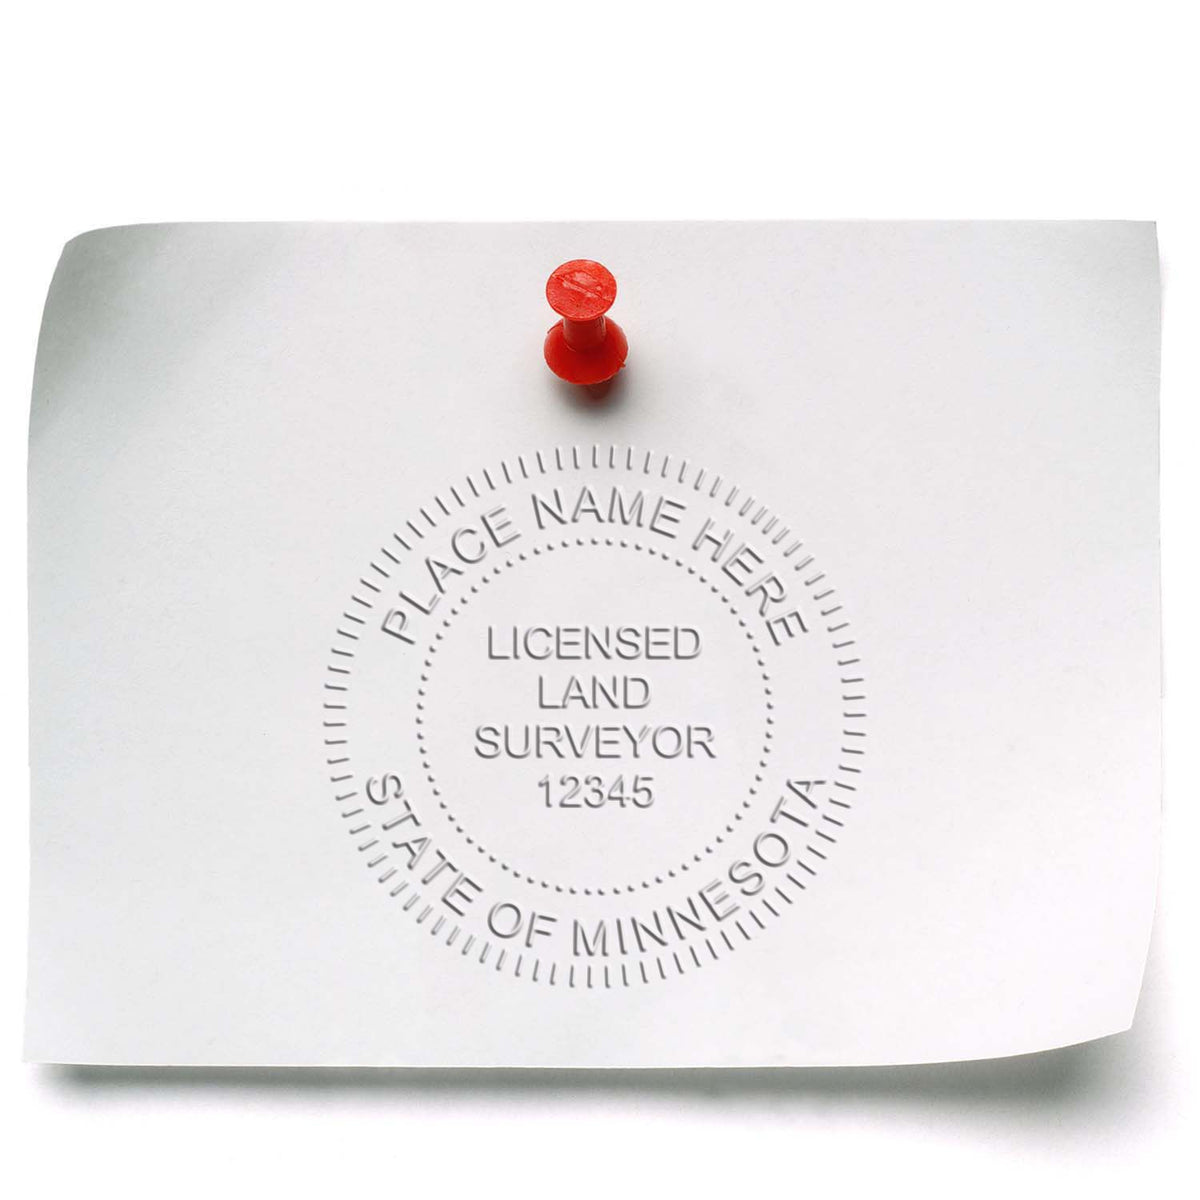 Another Example of a stamped impression of the State of Minnesota Soft Land Surveyor Embossing Seal on a piece of office paper.